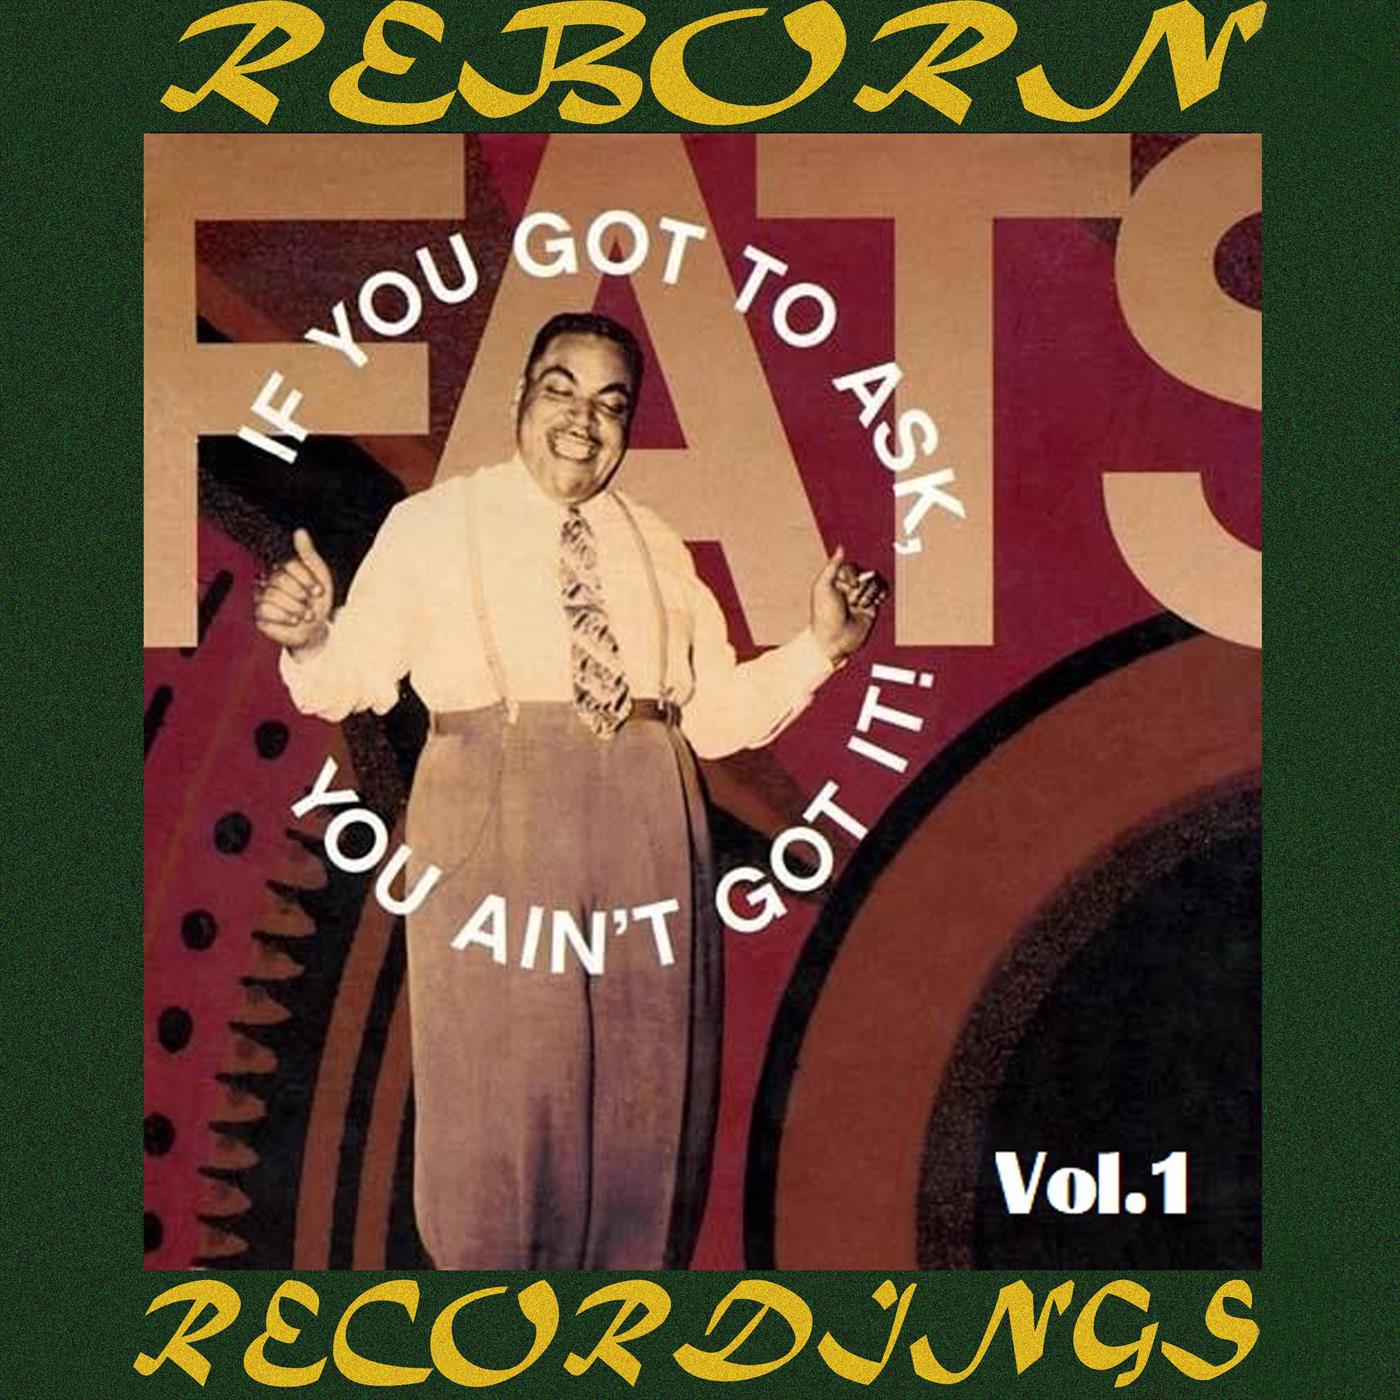 If You Got to Ask, You Ain't Got It, Vol.1 (HD Remastered)